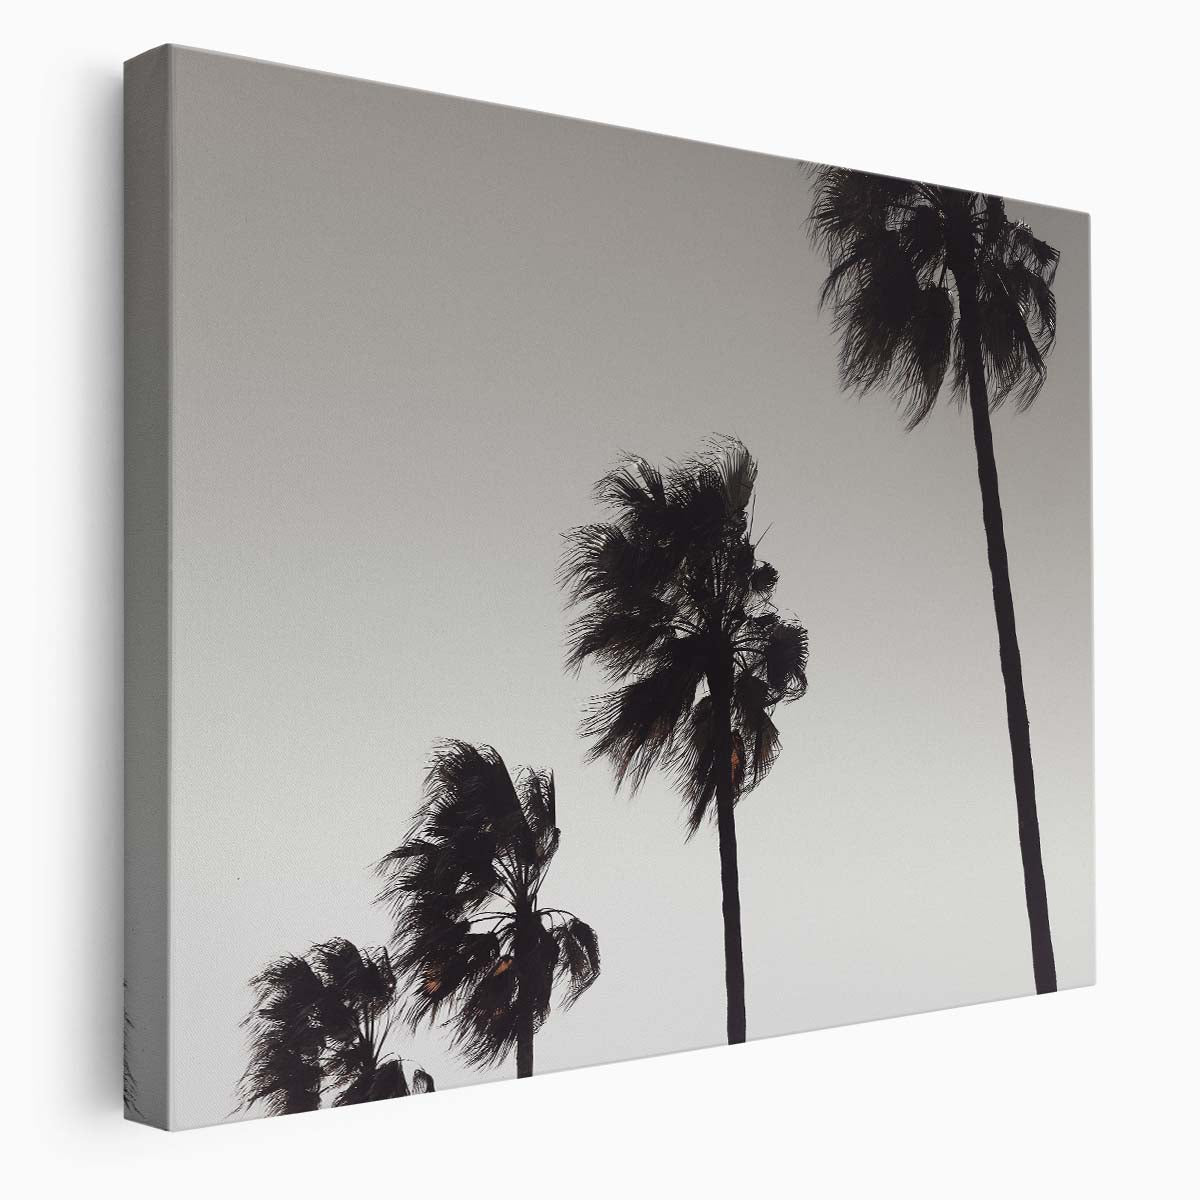 Coastal Paradise Palm Trees Monochrome Landscape Wall Art by Luxuriance Designs. Made in USA.